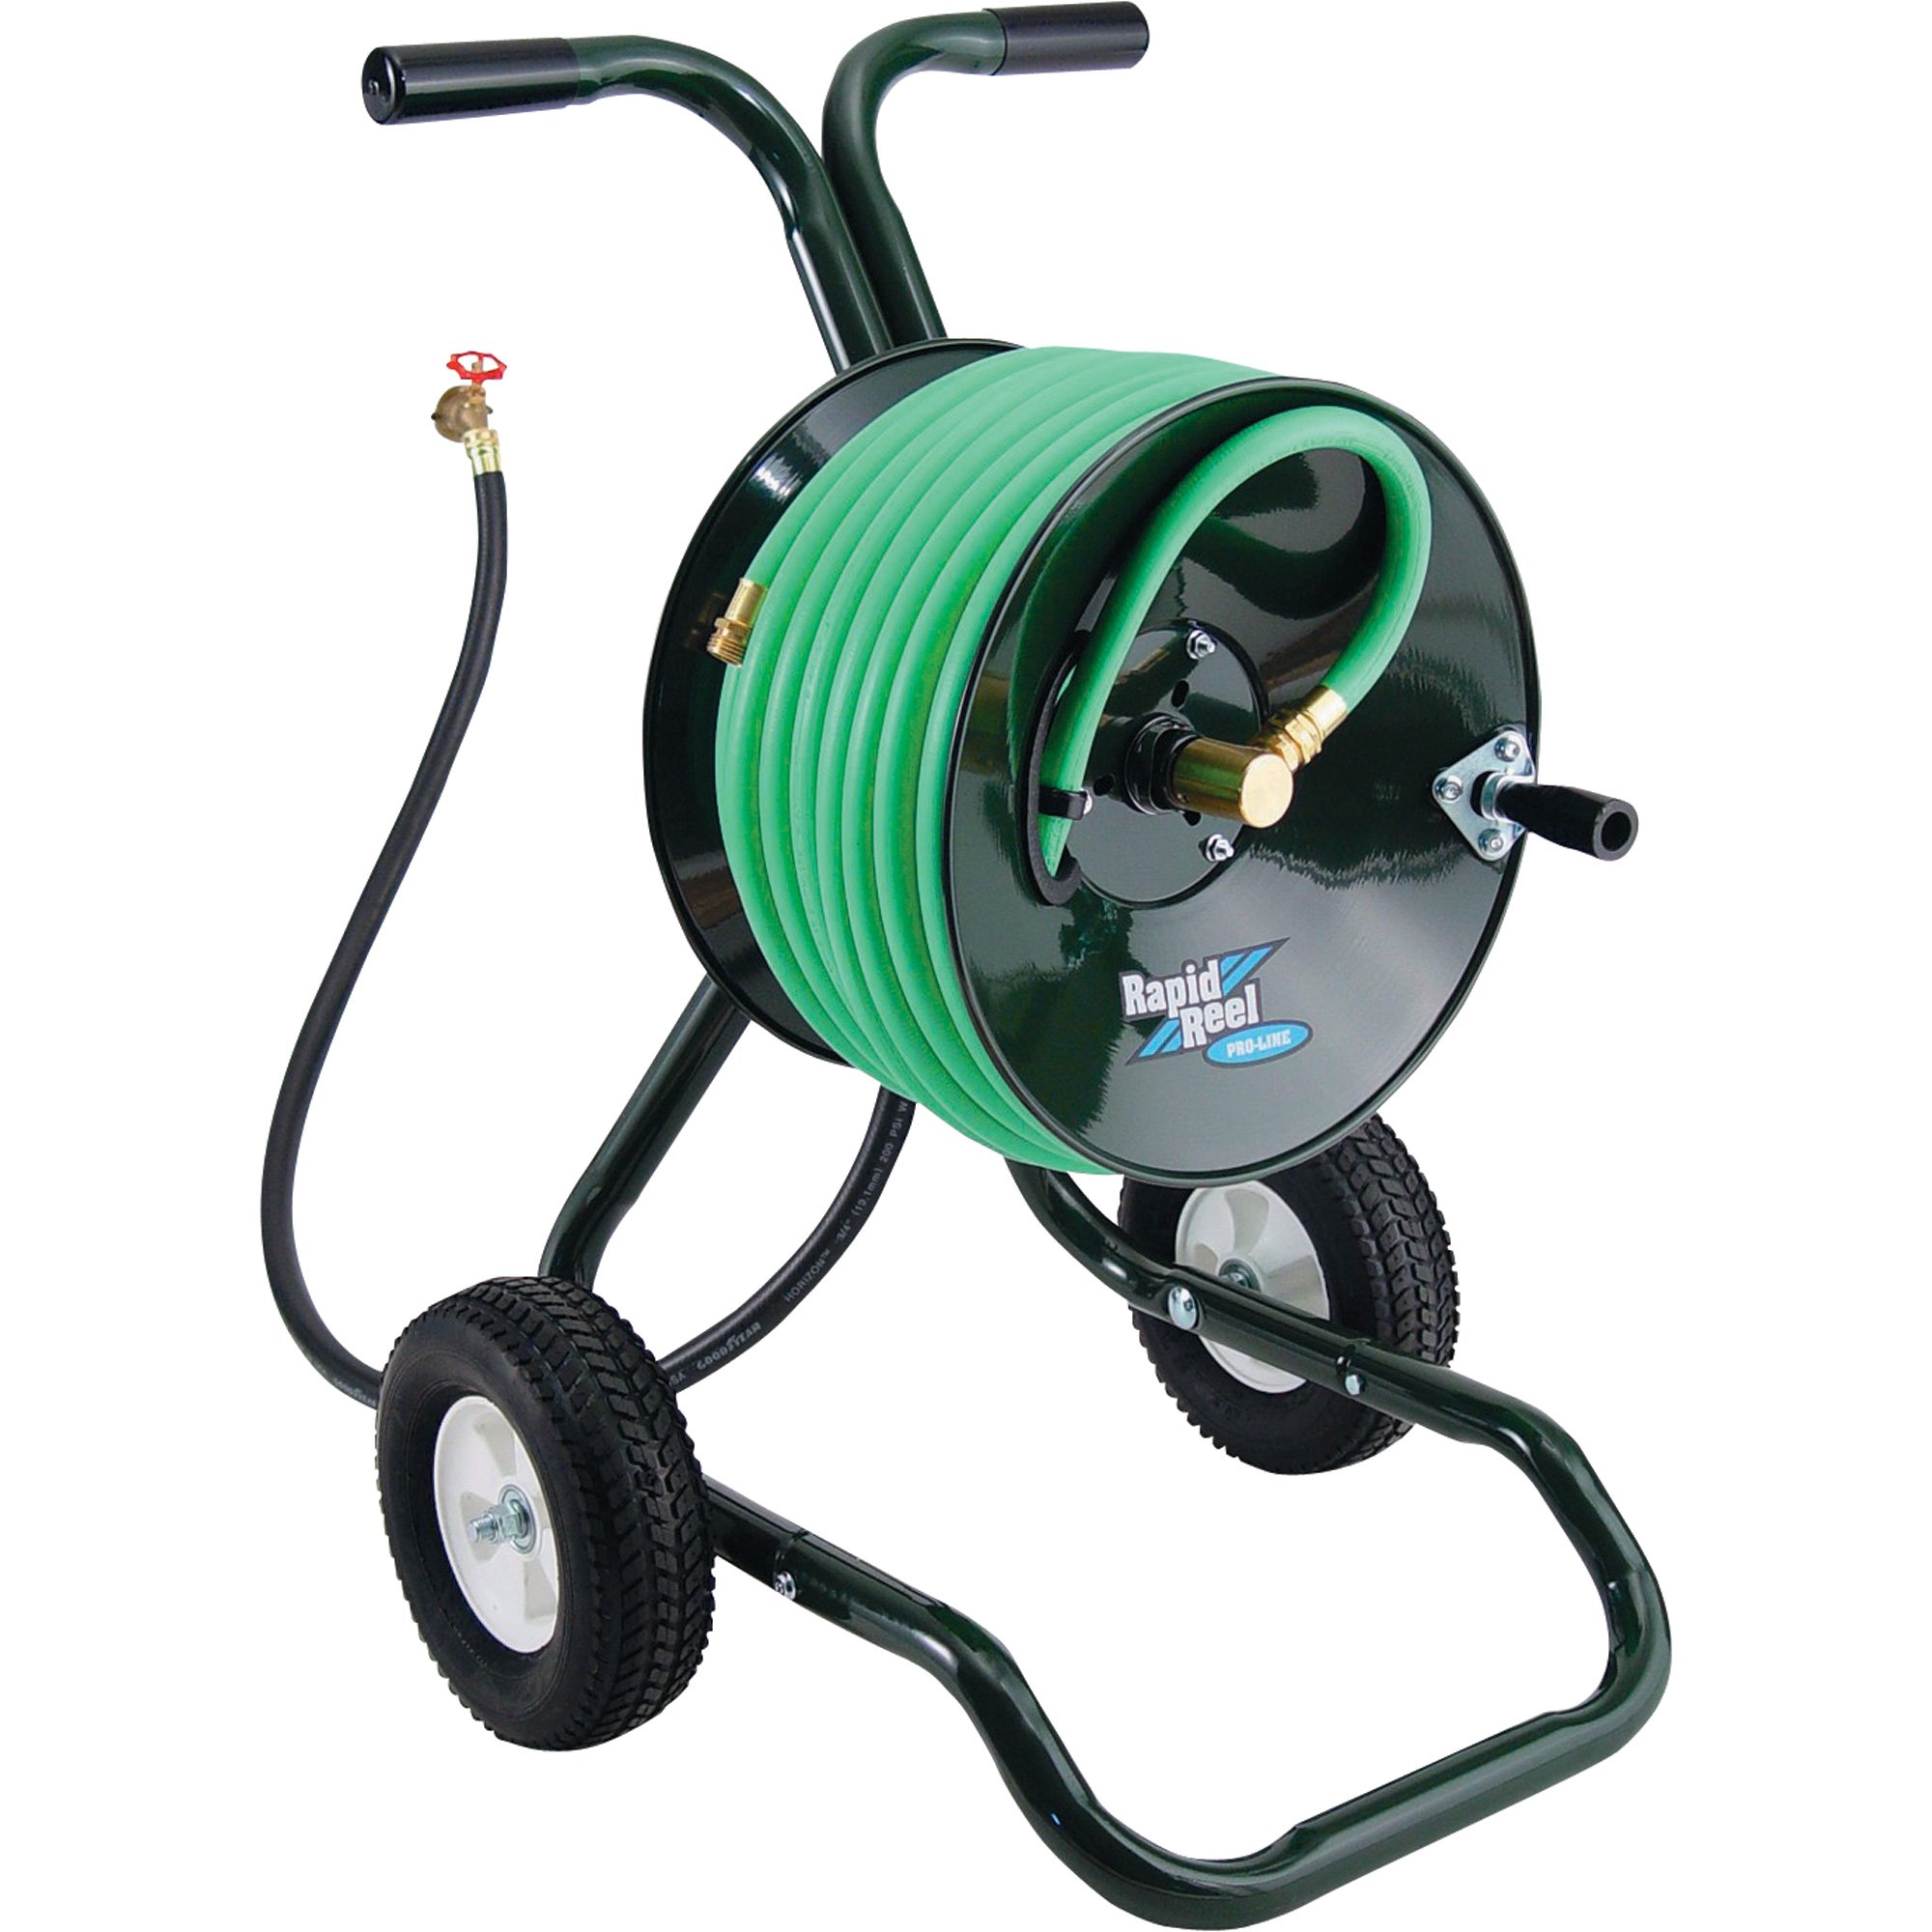 Rapid Reel Water Hose Reel With Cart — 150 PSI, Holds 5/8in. x